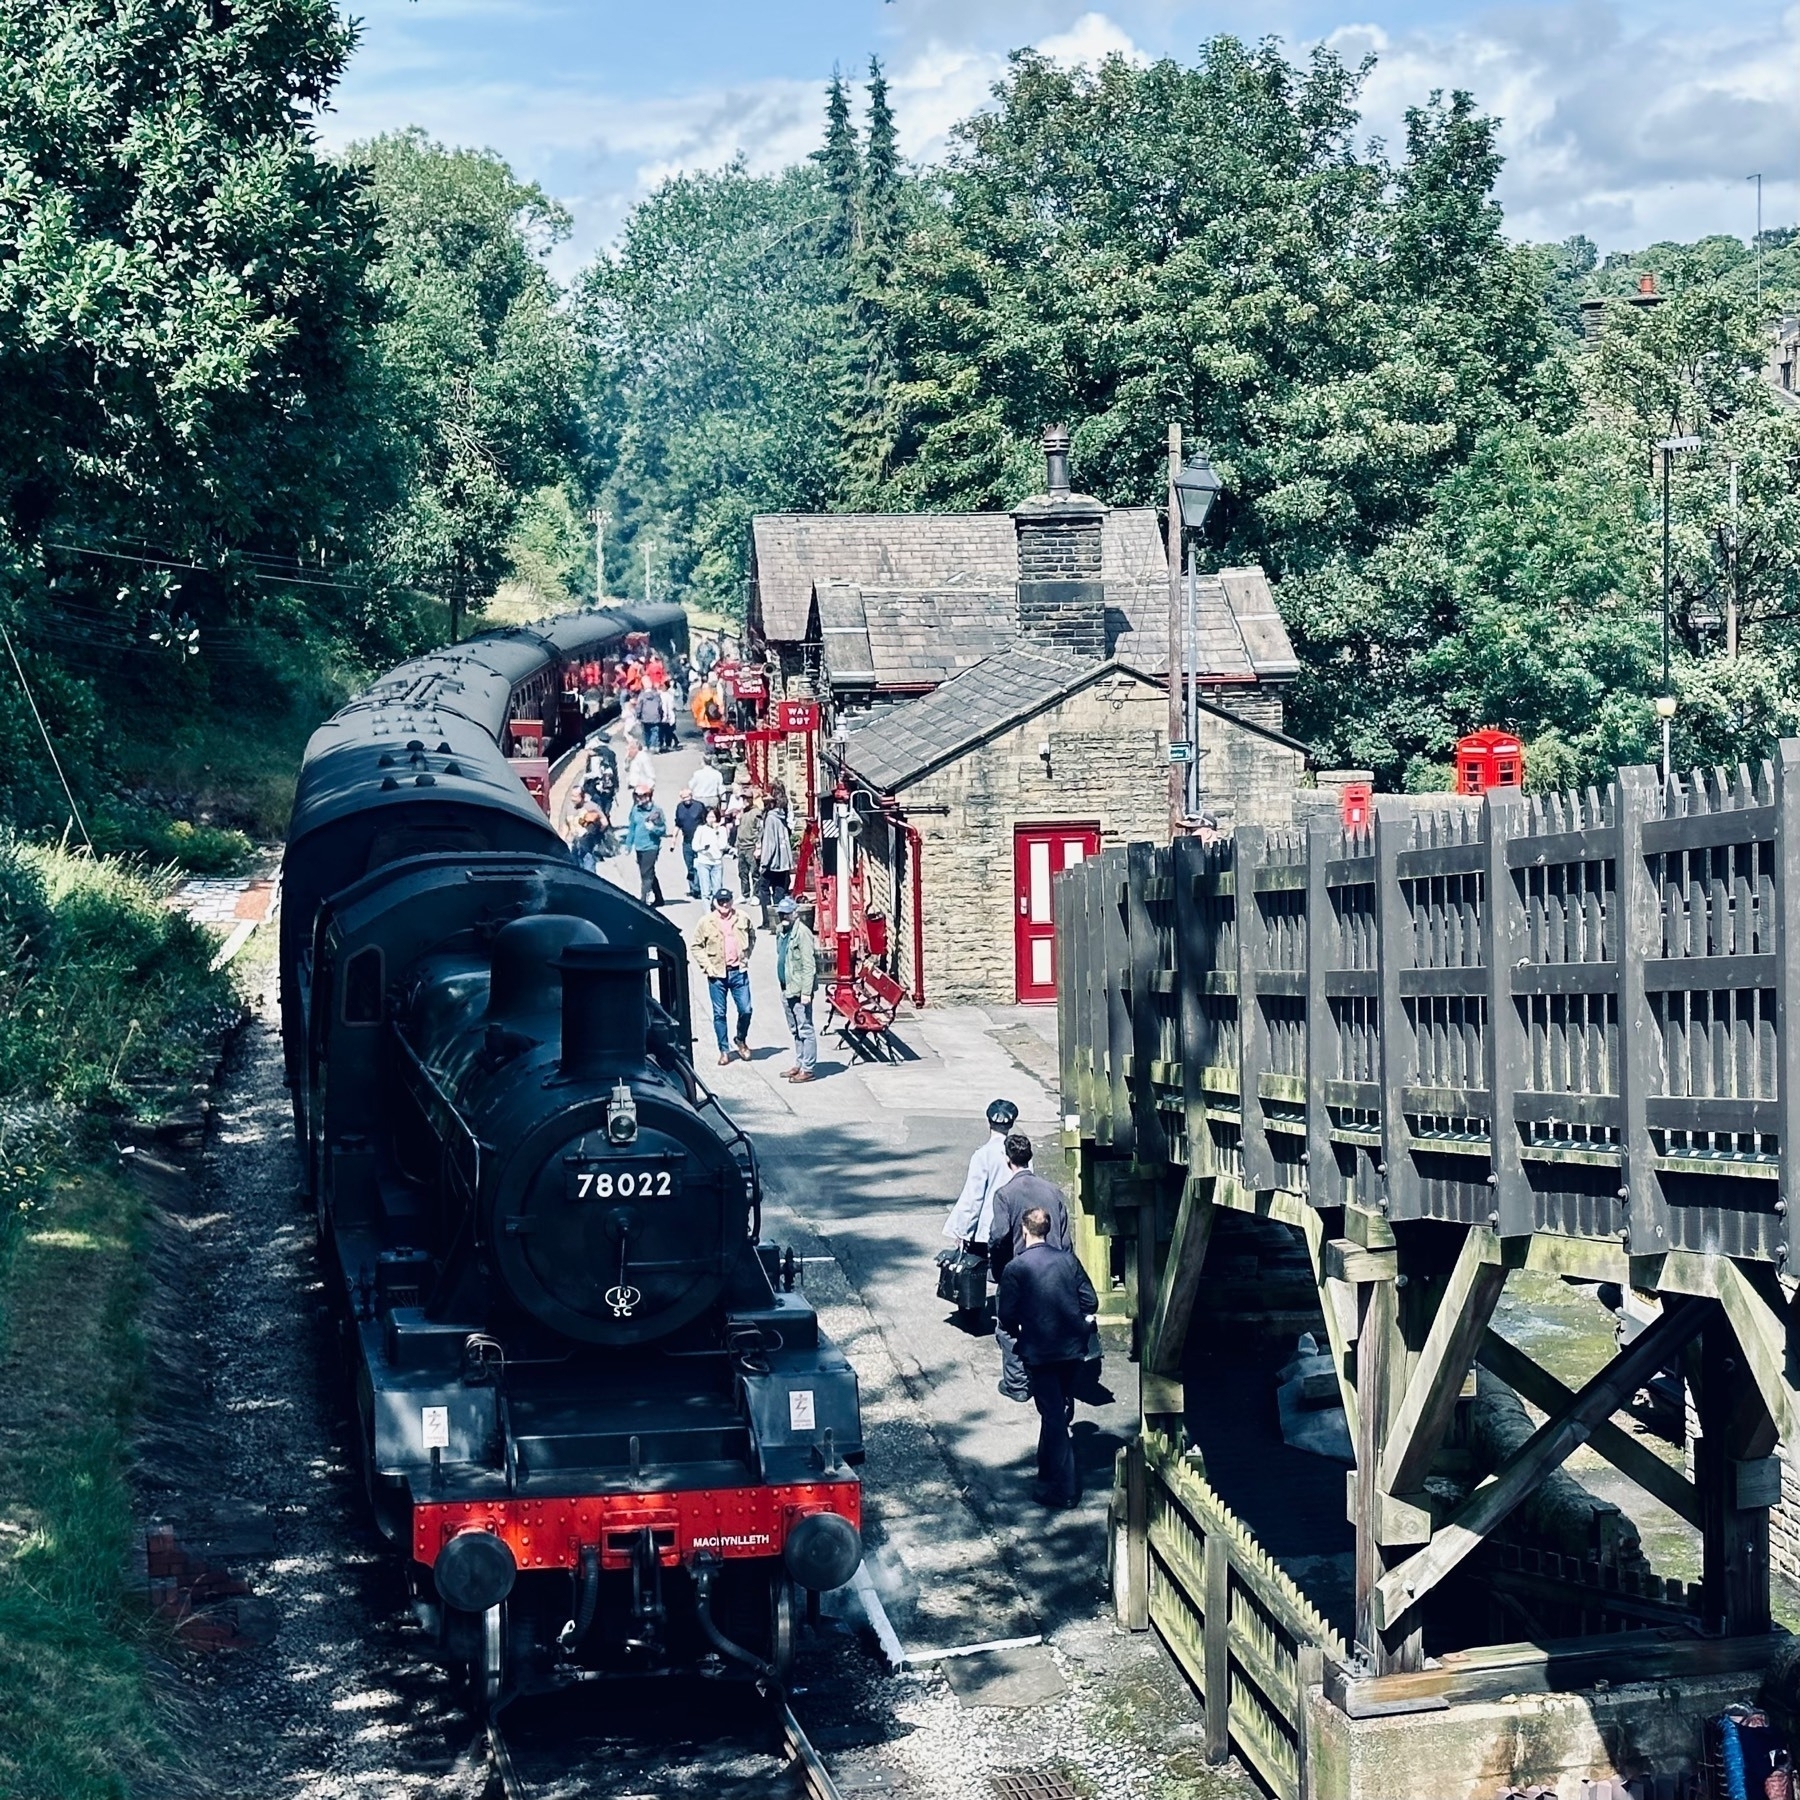 The front of a steam train pulled into Haworth station, people on the platform. Taken from an elevated bridge